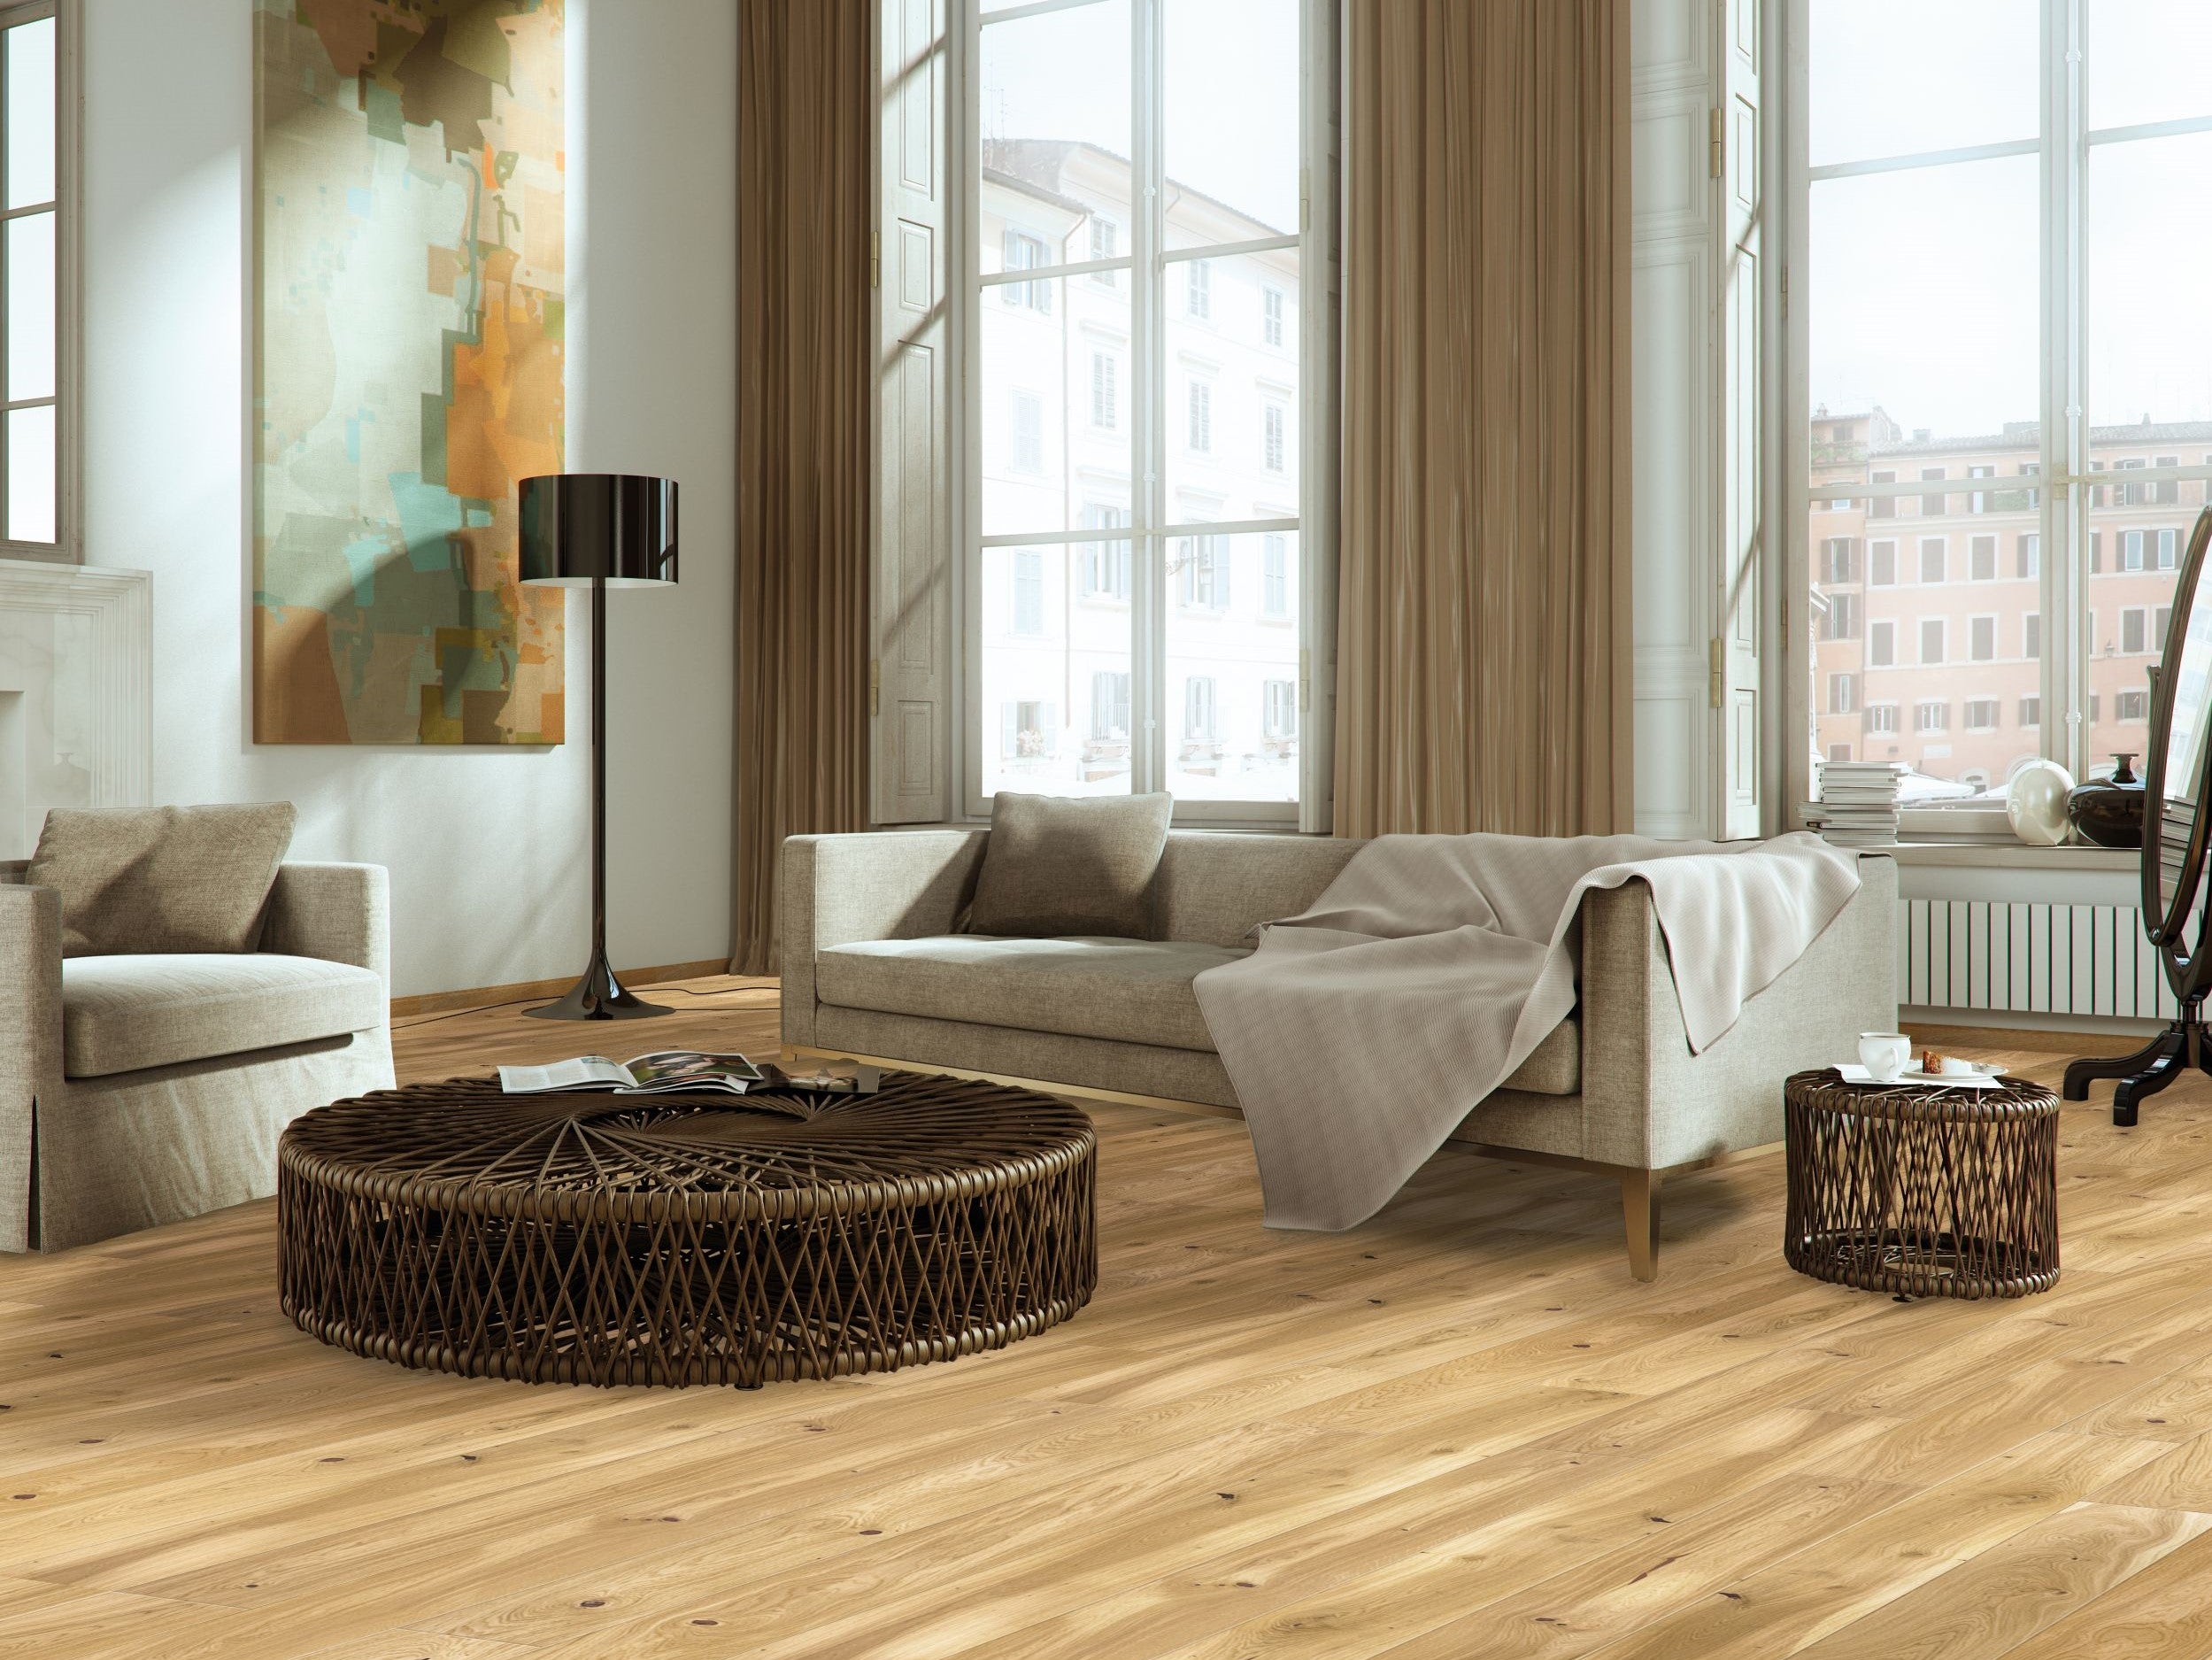 Find Out What Is the Cost Of Hardwood Floors